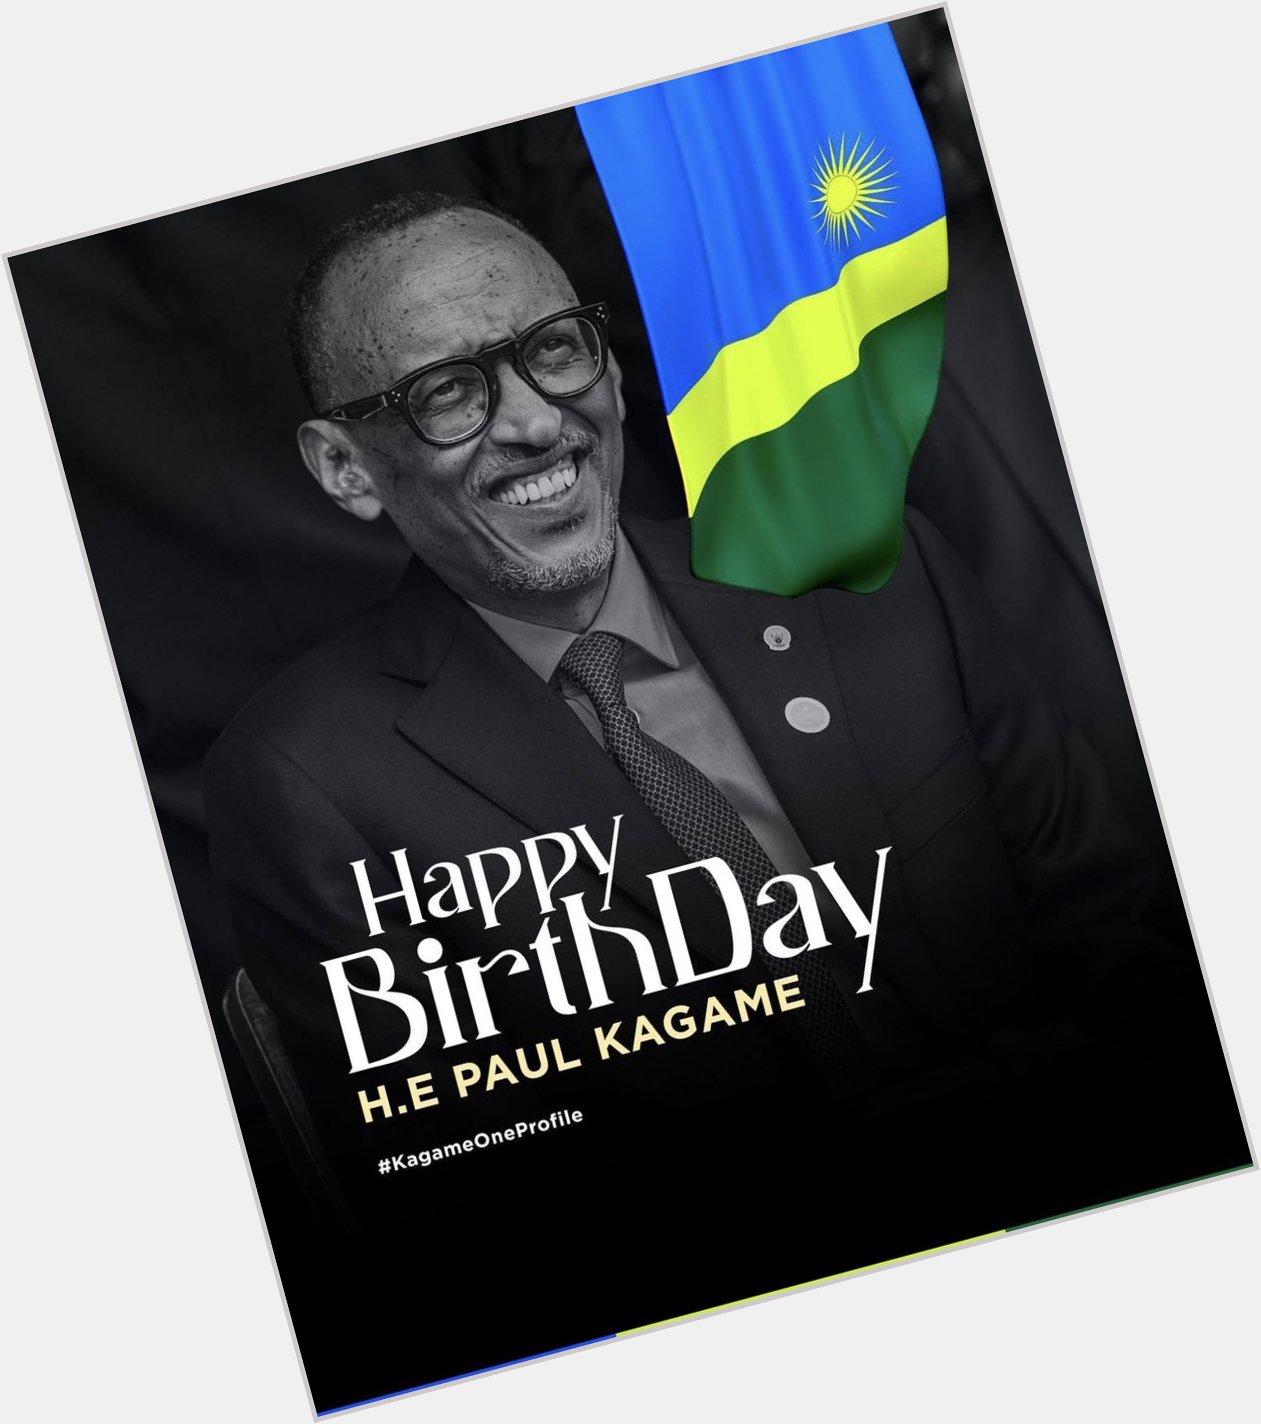 My another president.
Happy birthday uncle Paul kagame. 